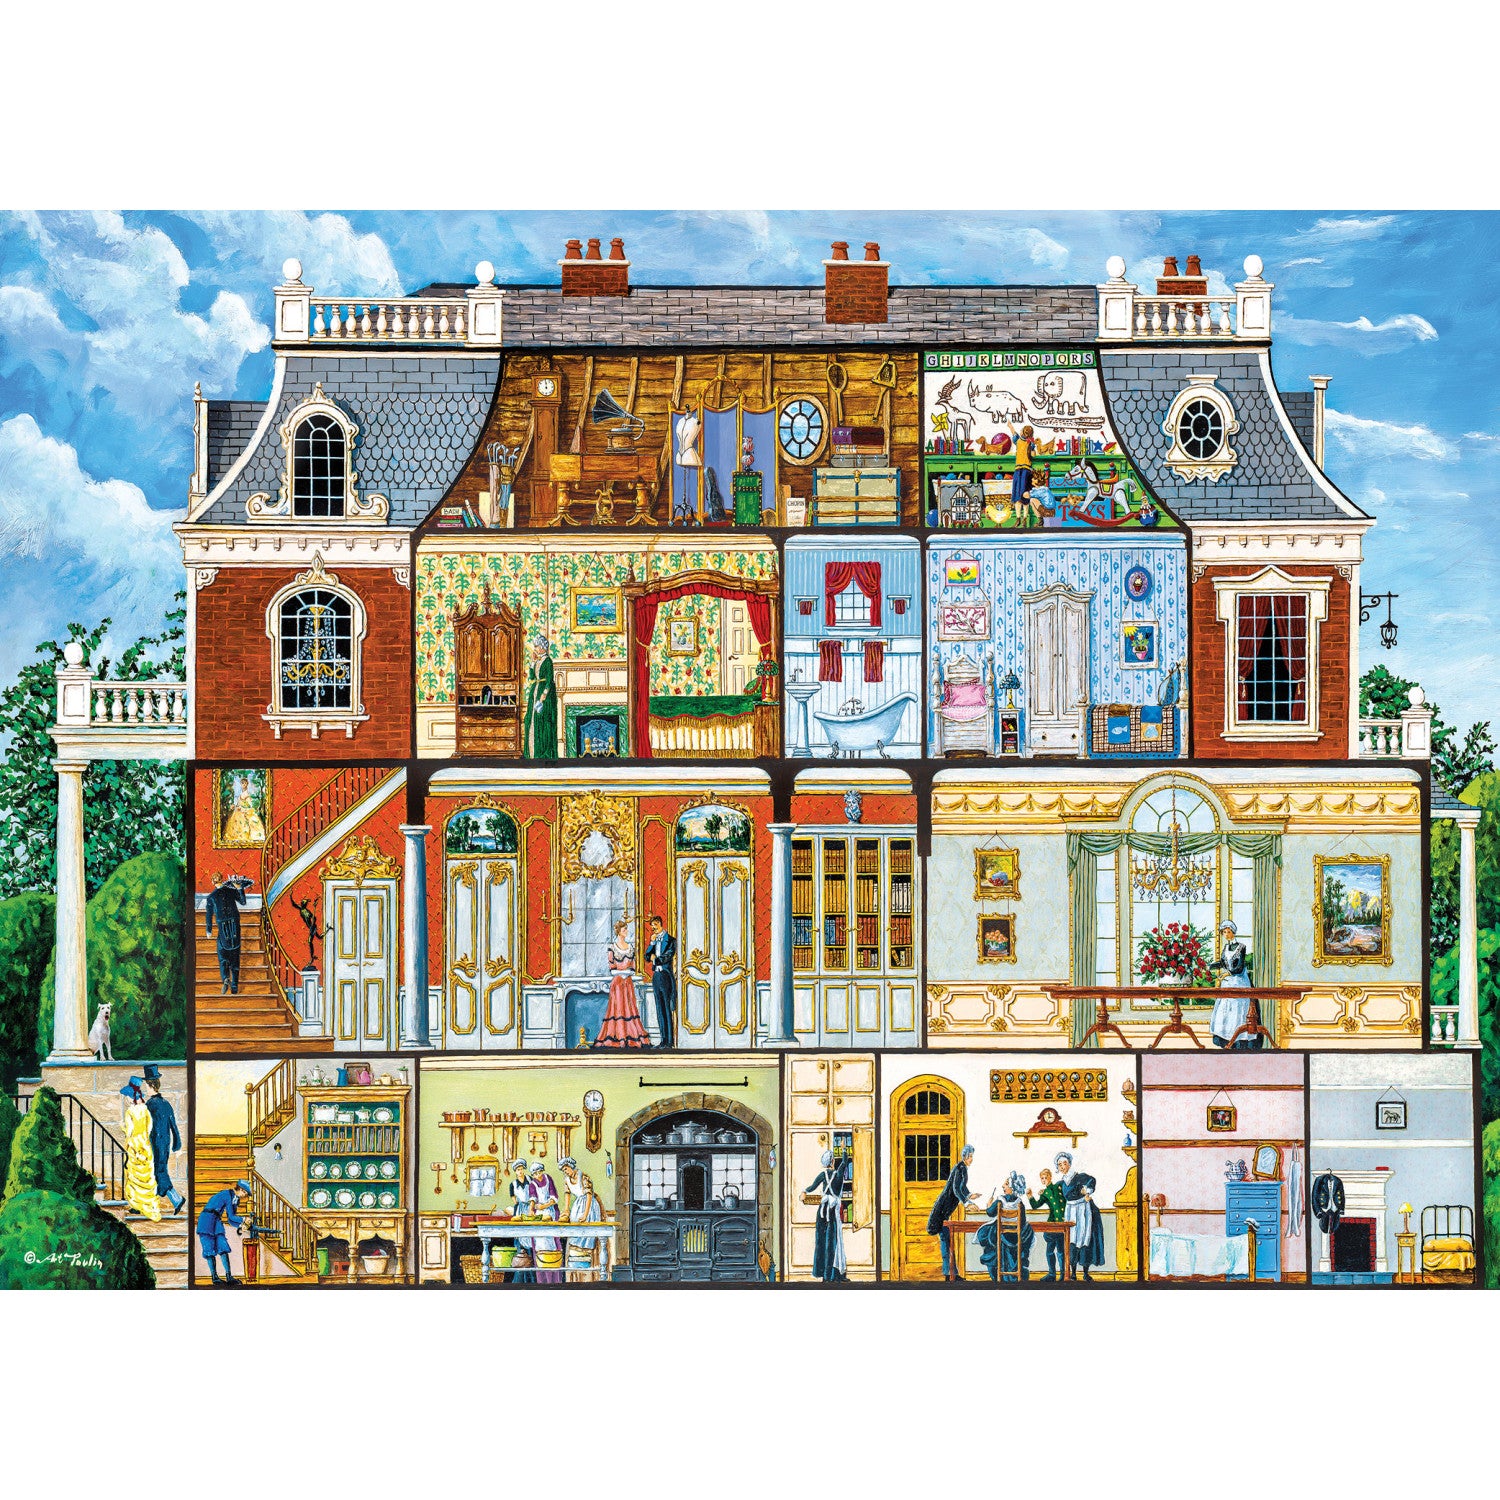 Inside Out - Walden Manor House 1000 Piece Puzzle